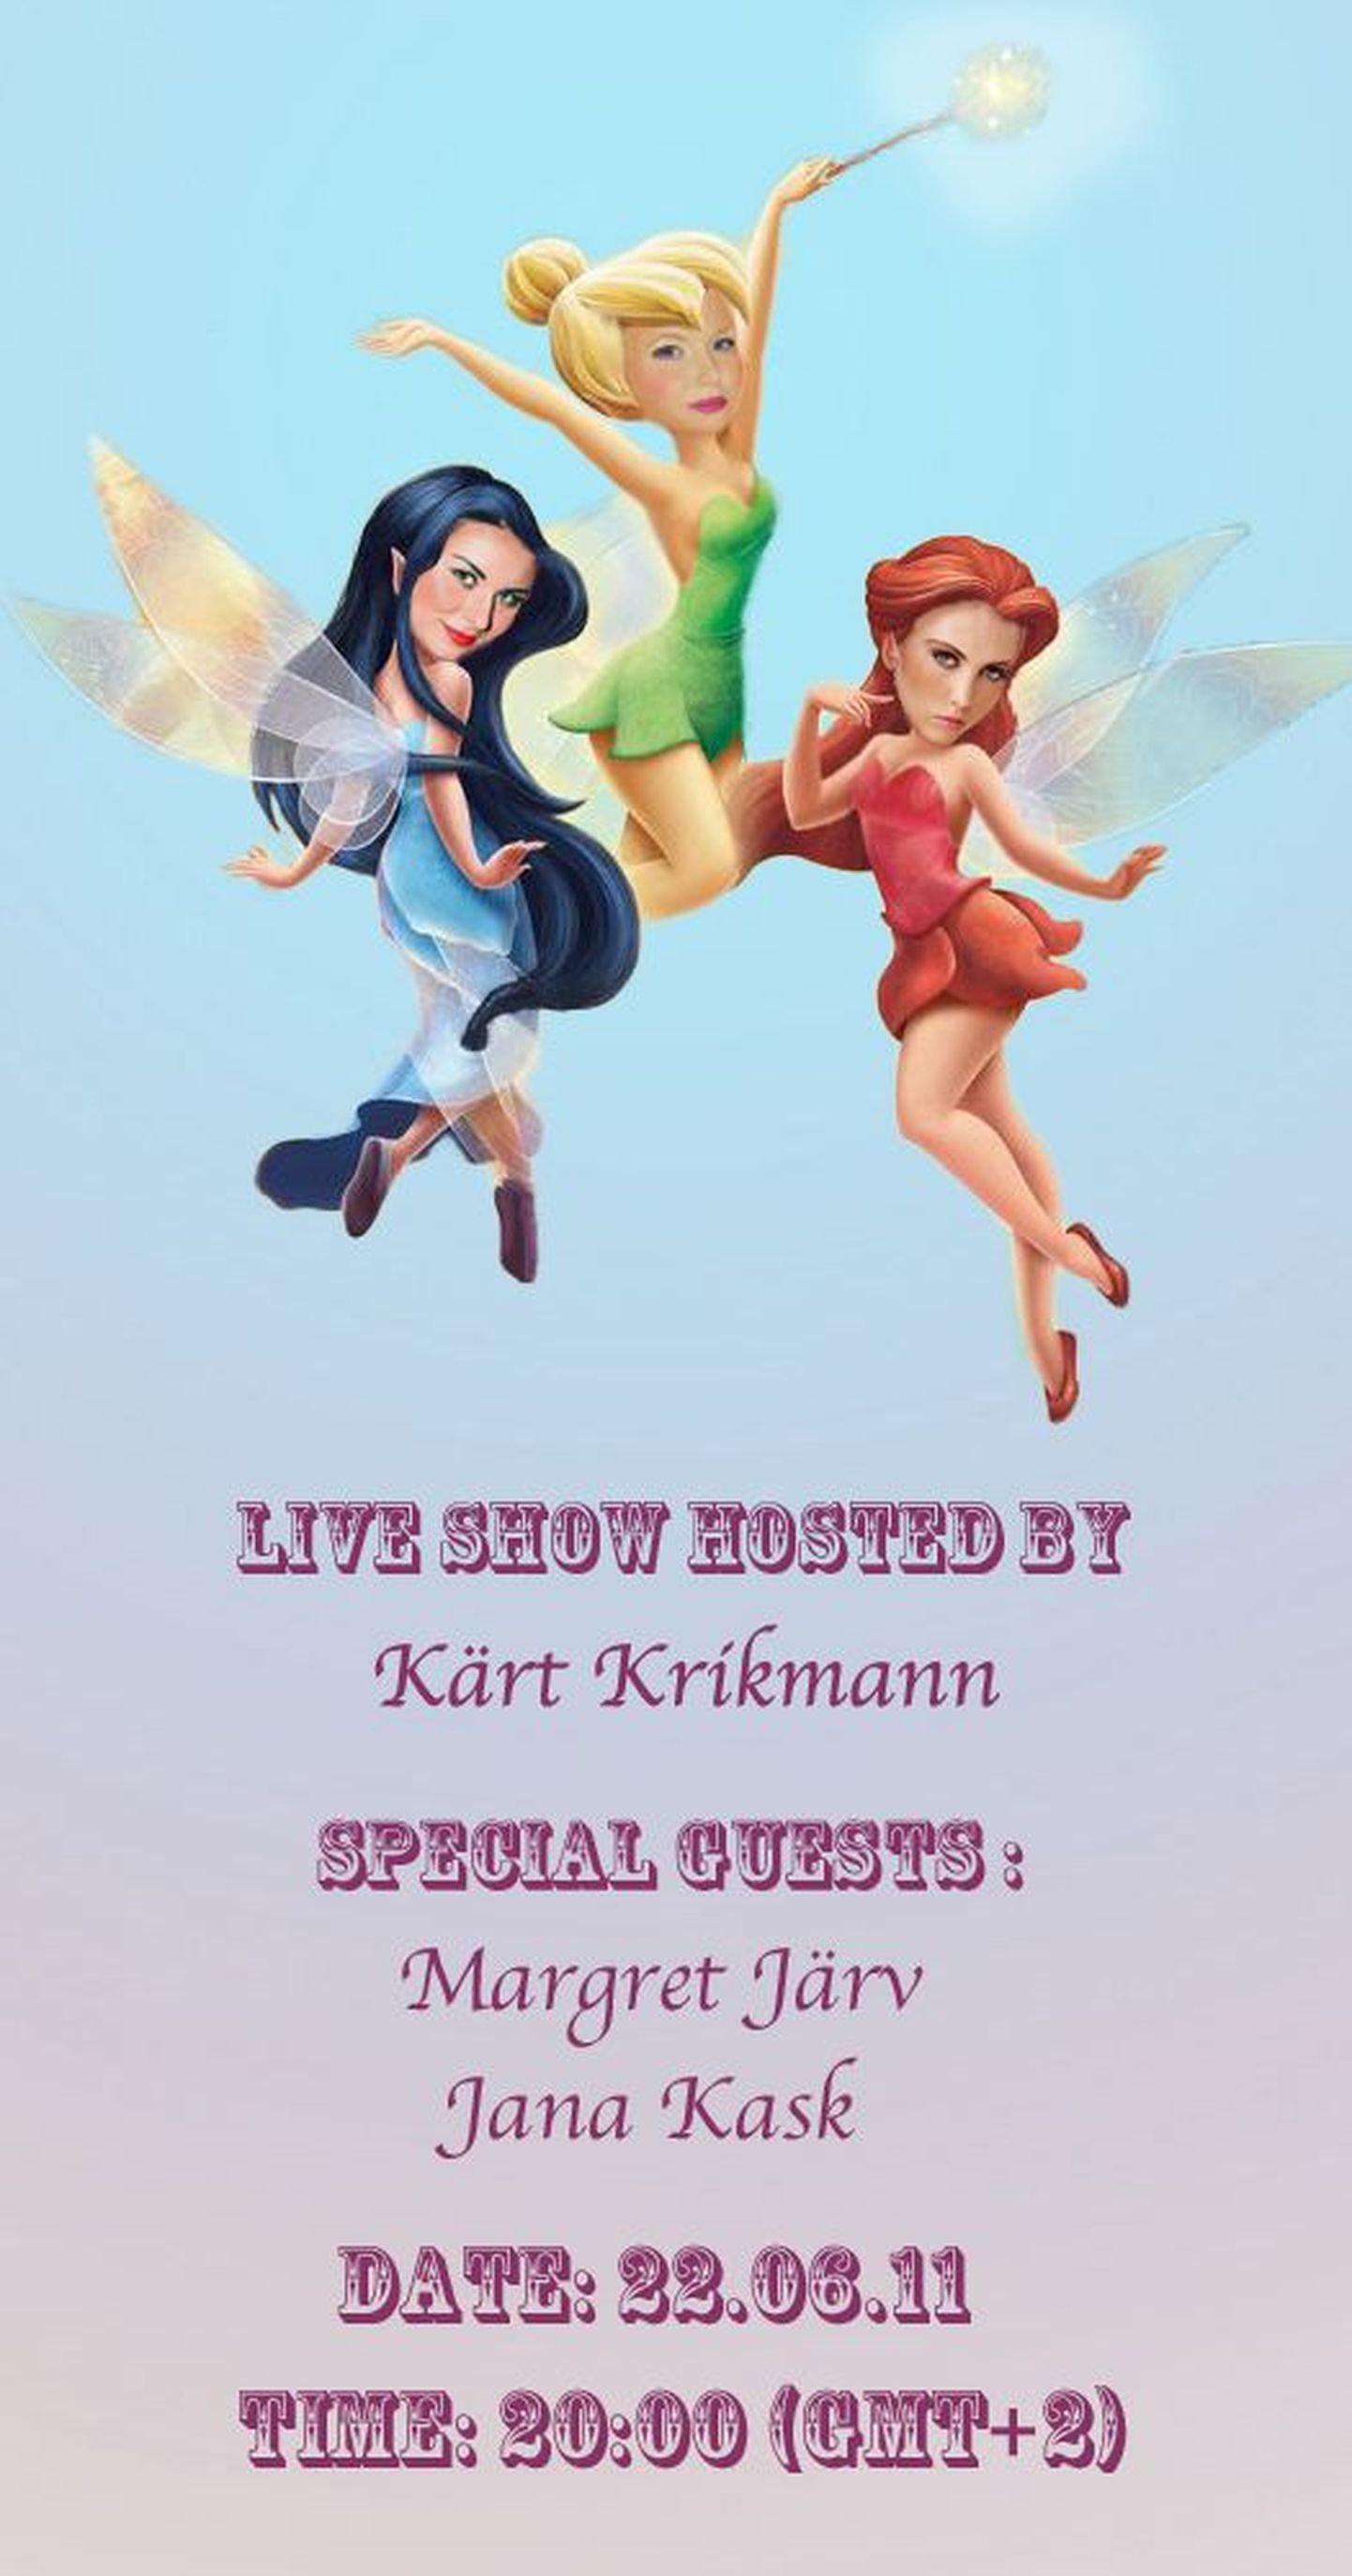 Live Show With Margret Järv And Jana Kask 22.06.11! Don`t miss it!